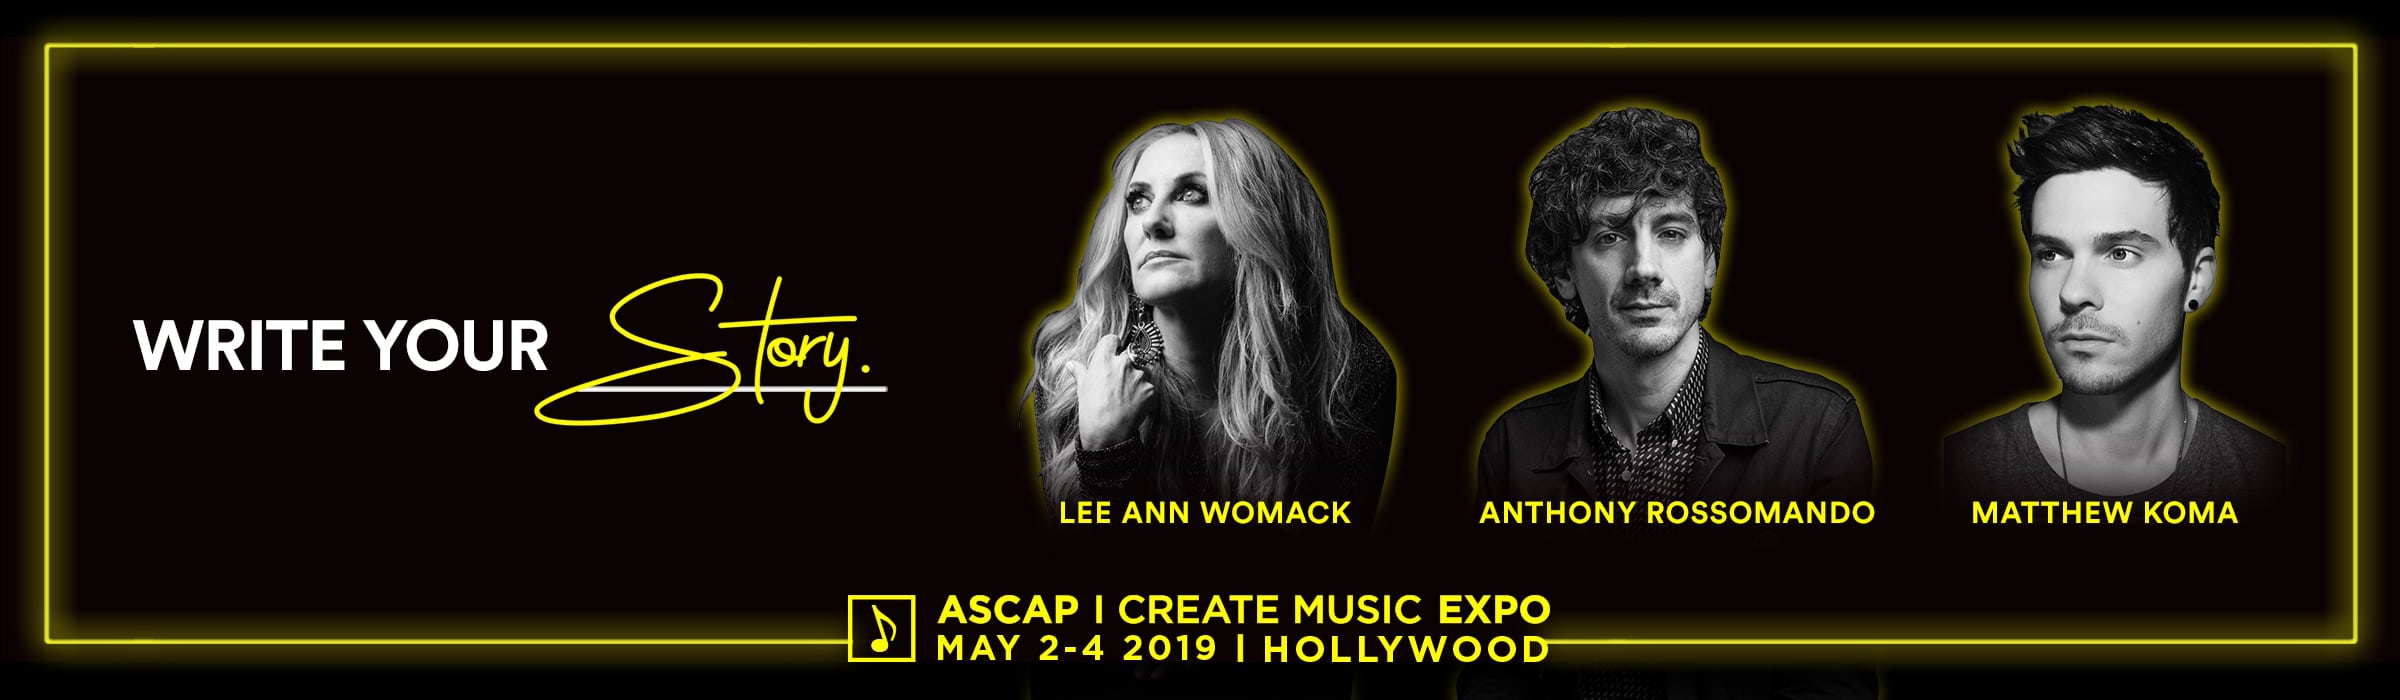 ASCAP “I Create Music” Expo Adds Oscar-Winning “Shallow”  Co-Writer Anthony Rossomando And More To Lineup